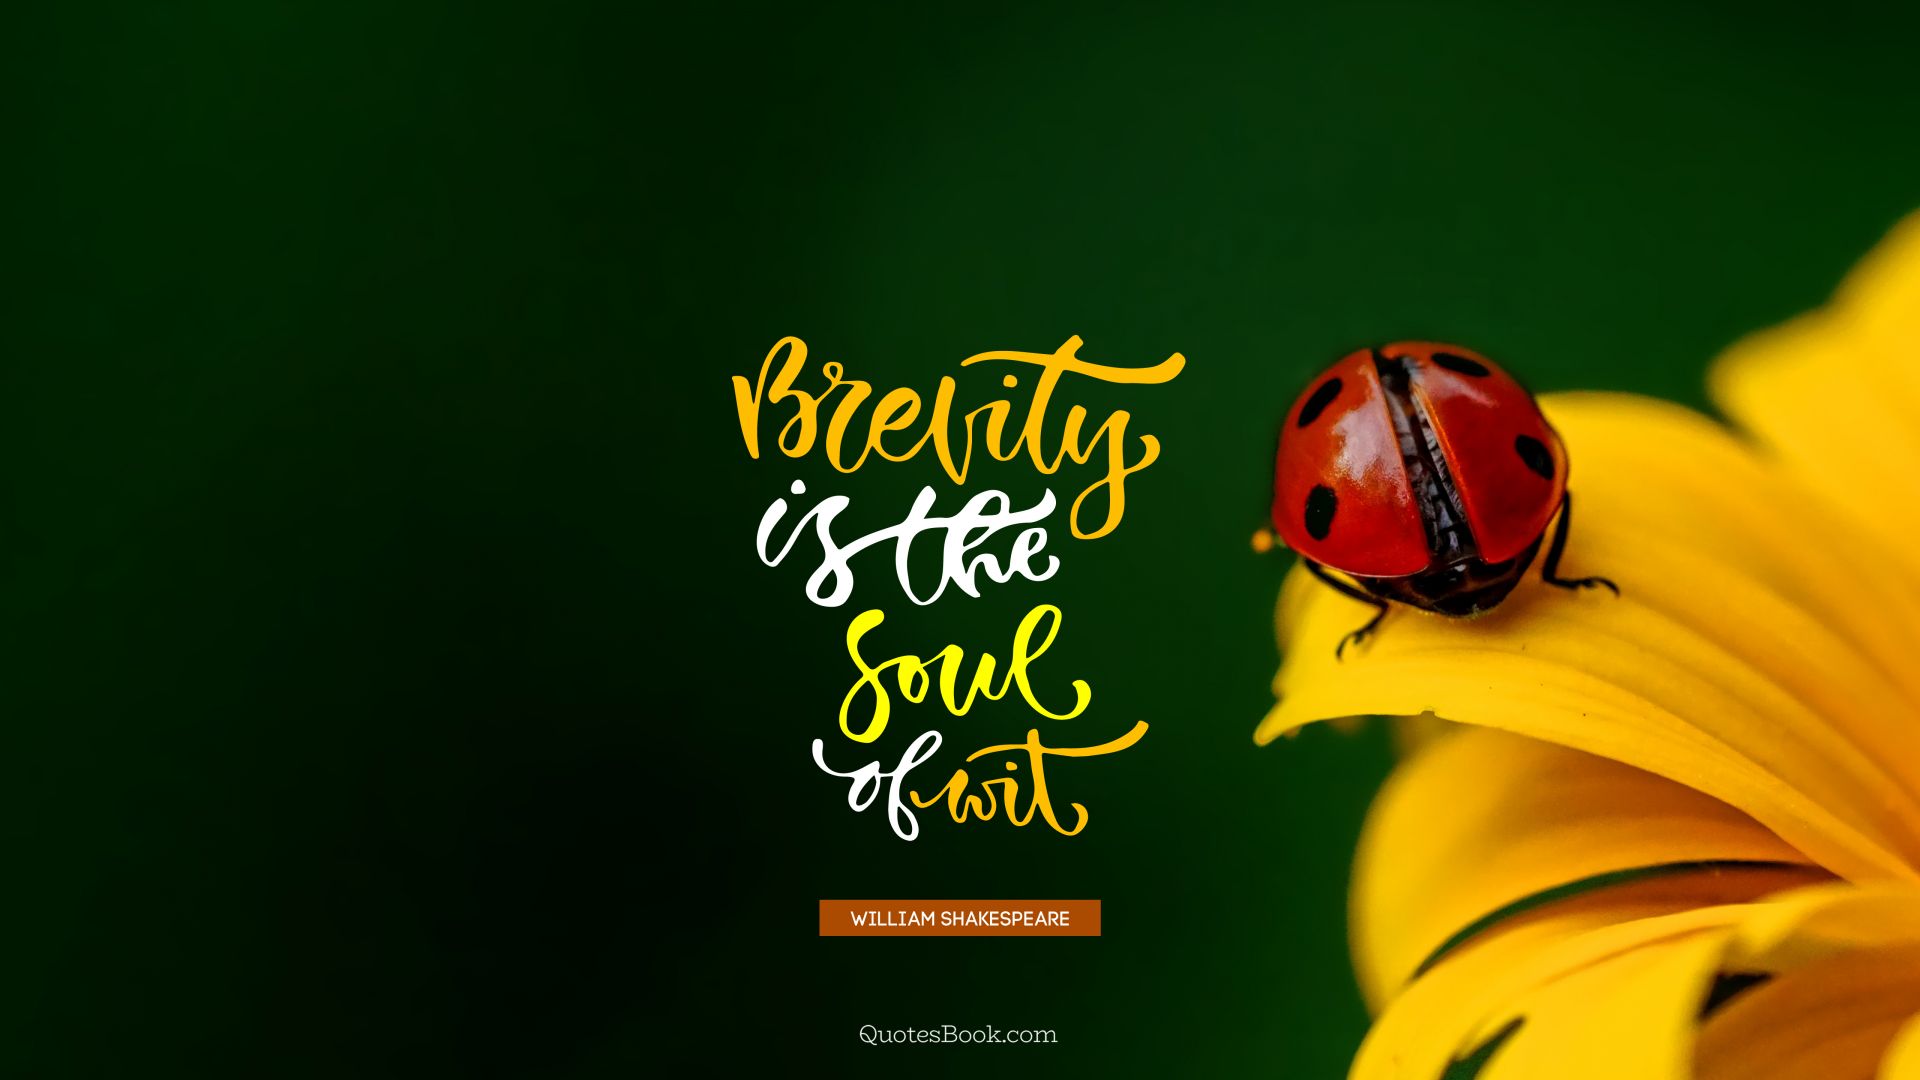 Brevity is the soul of wit. - Quote by William Shakespeare